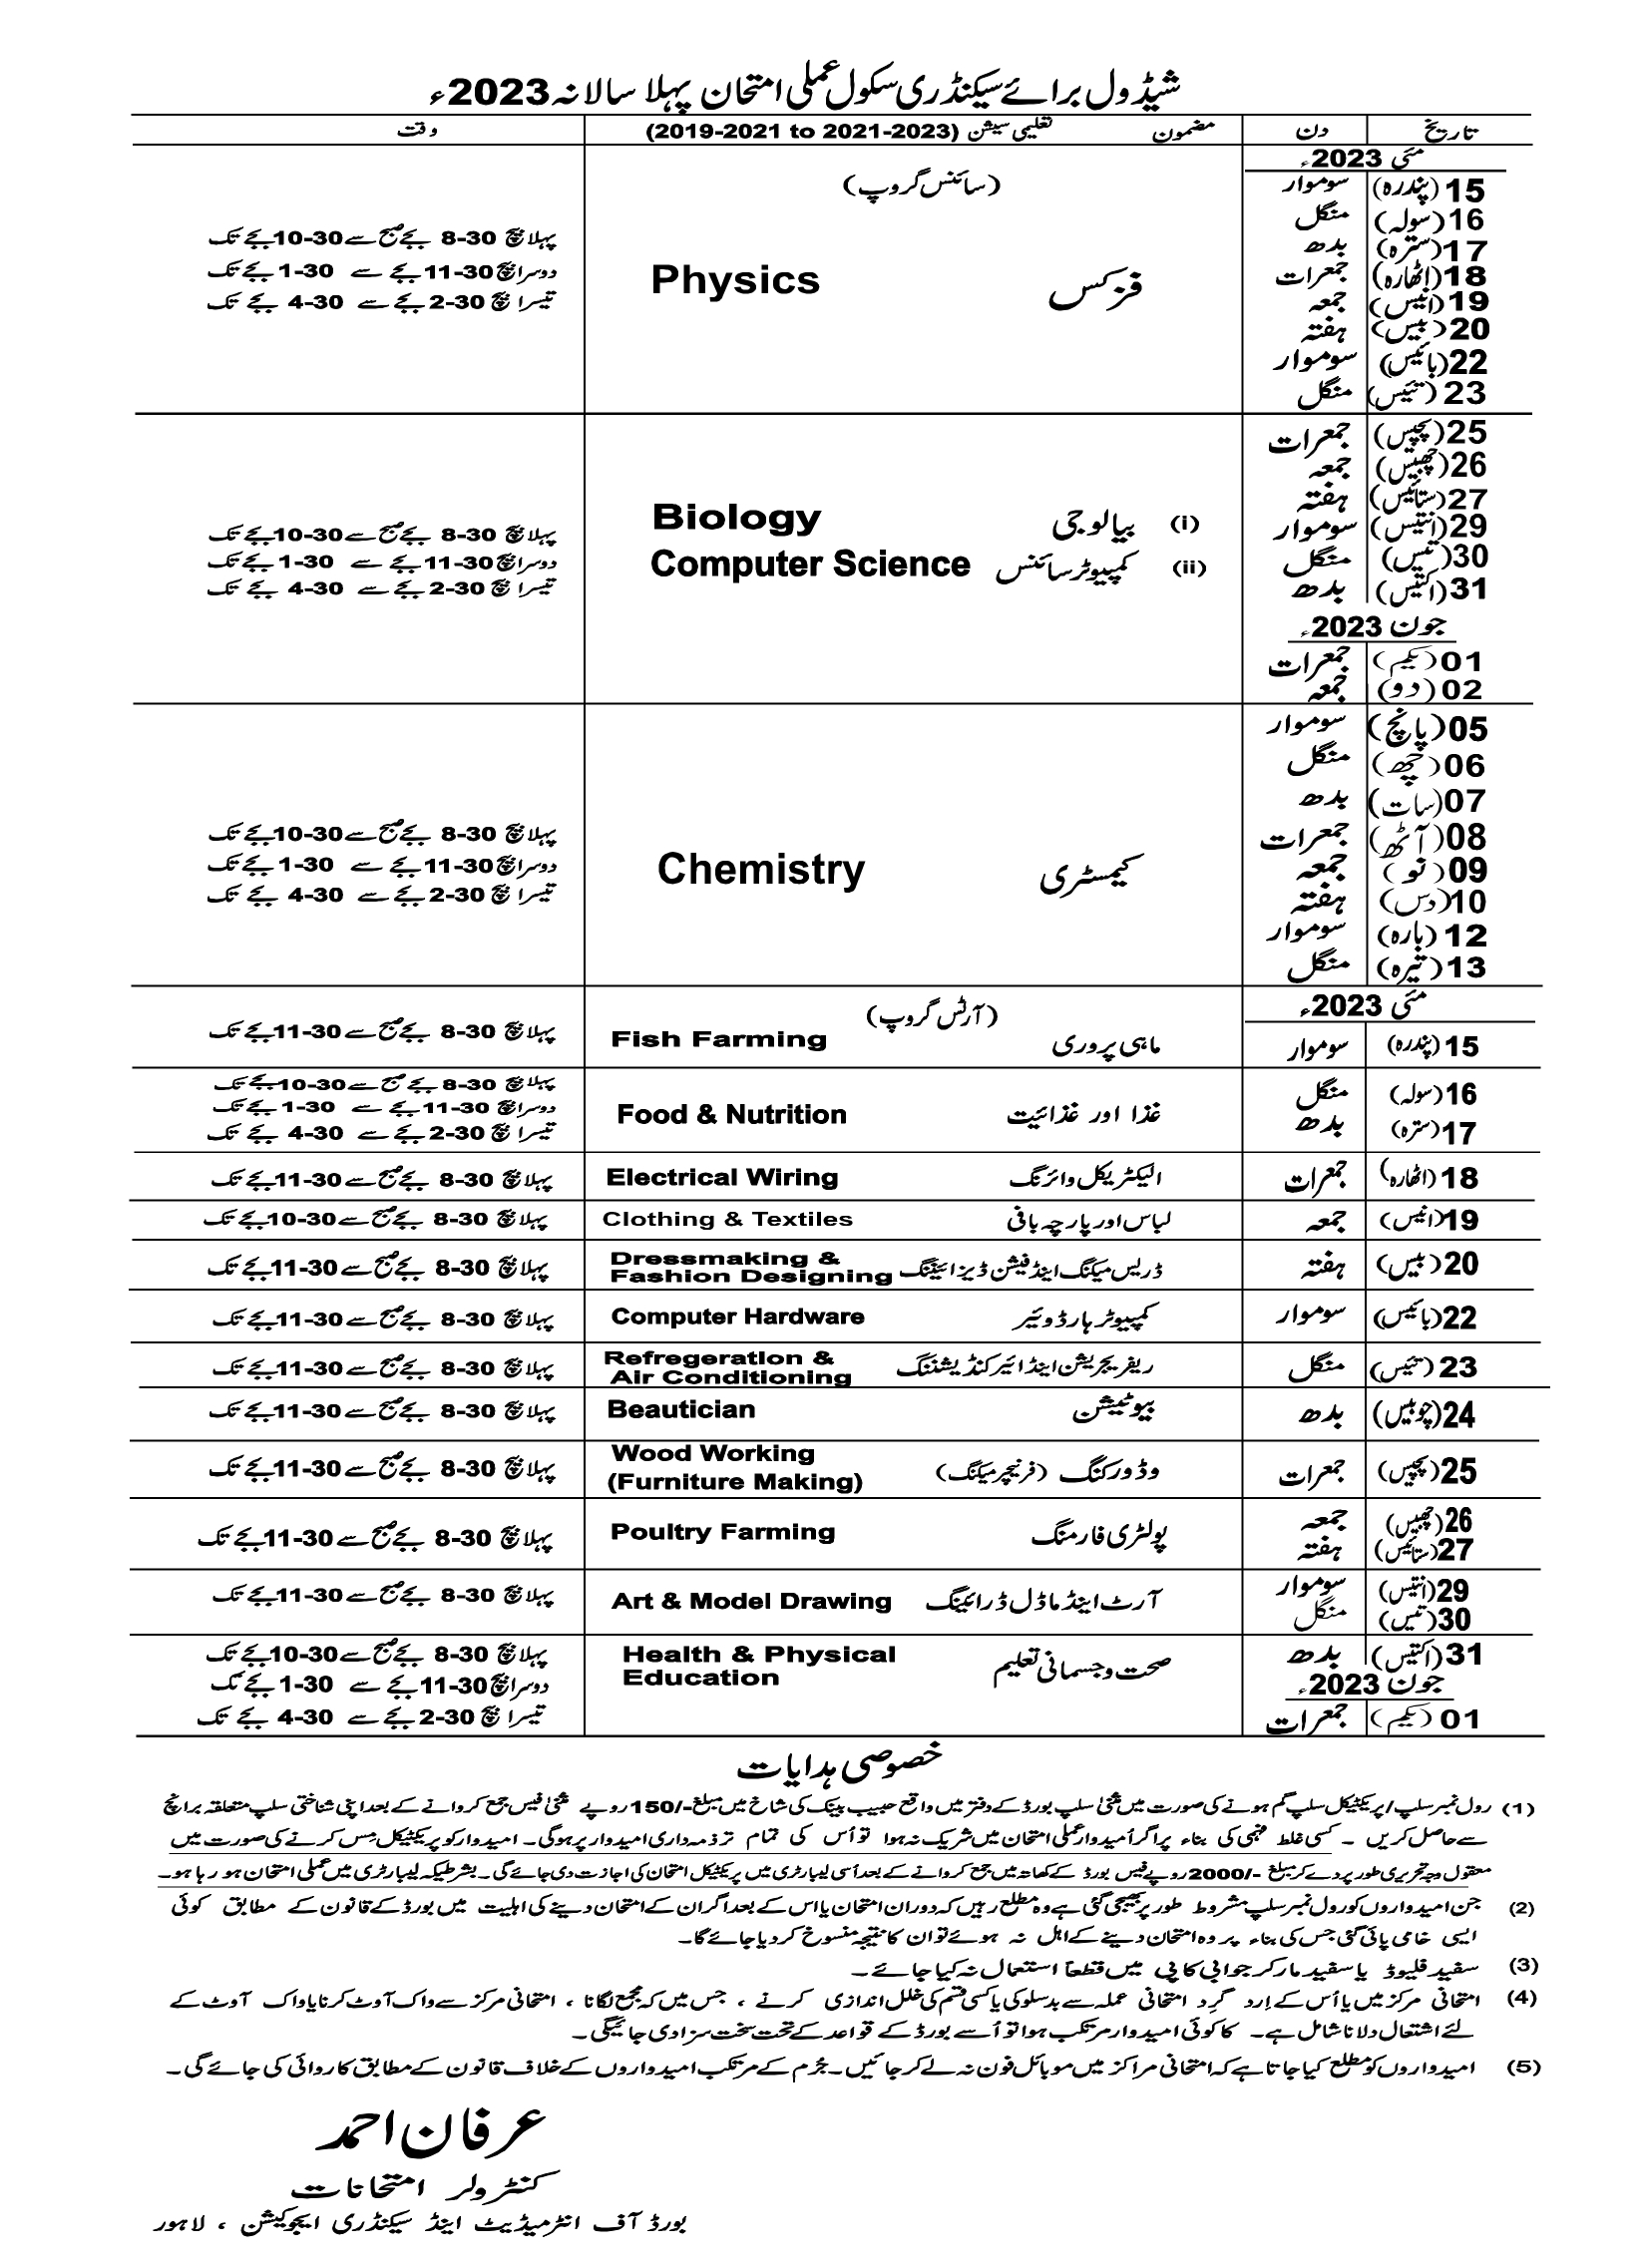 Check Online 10th Class Date Sheet BISE LHR 2022 Annual Exam